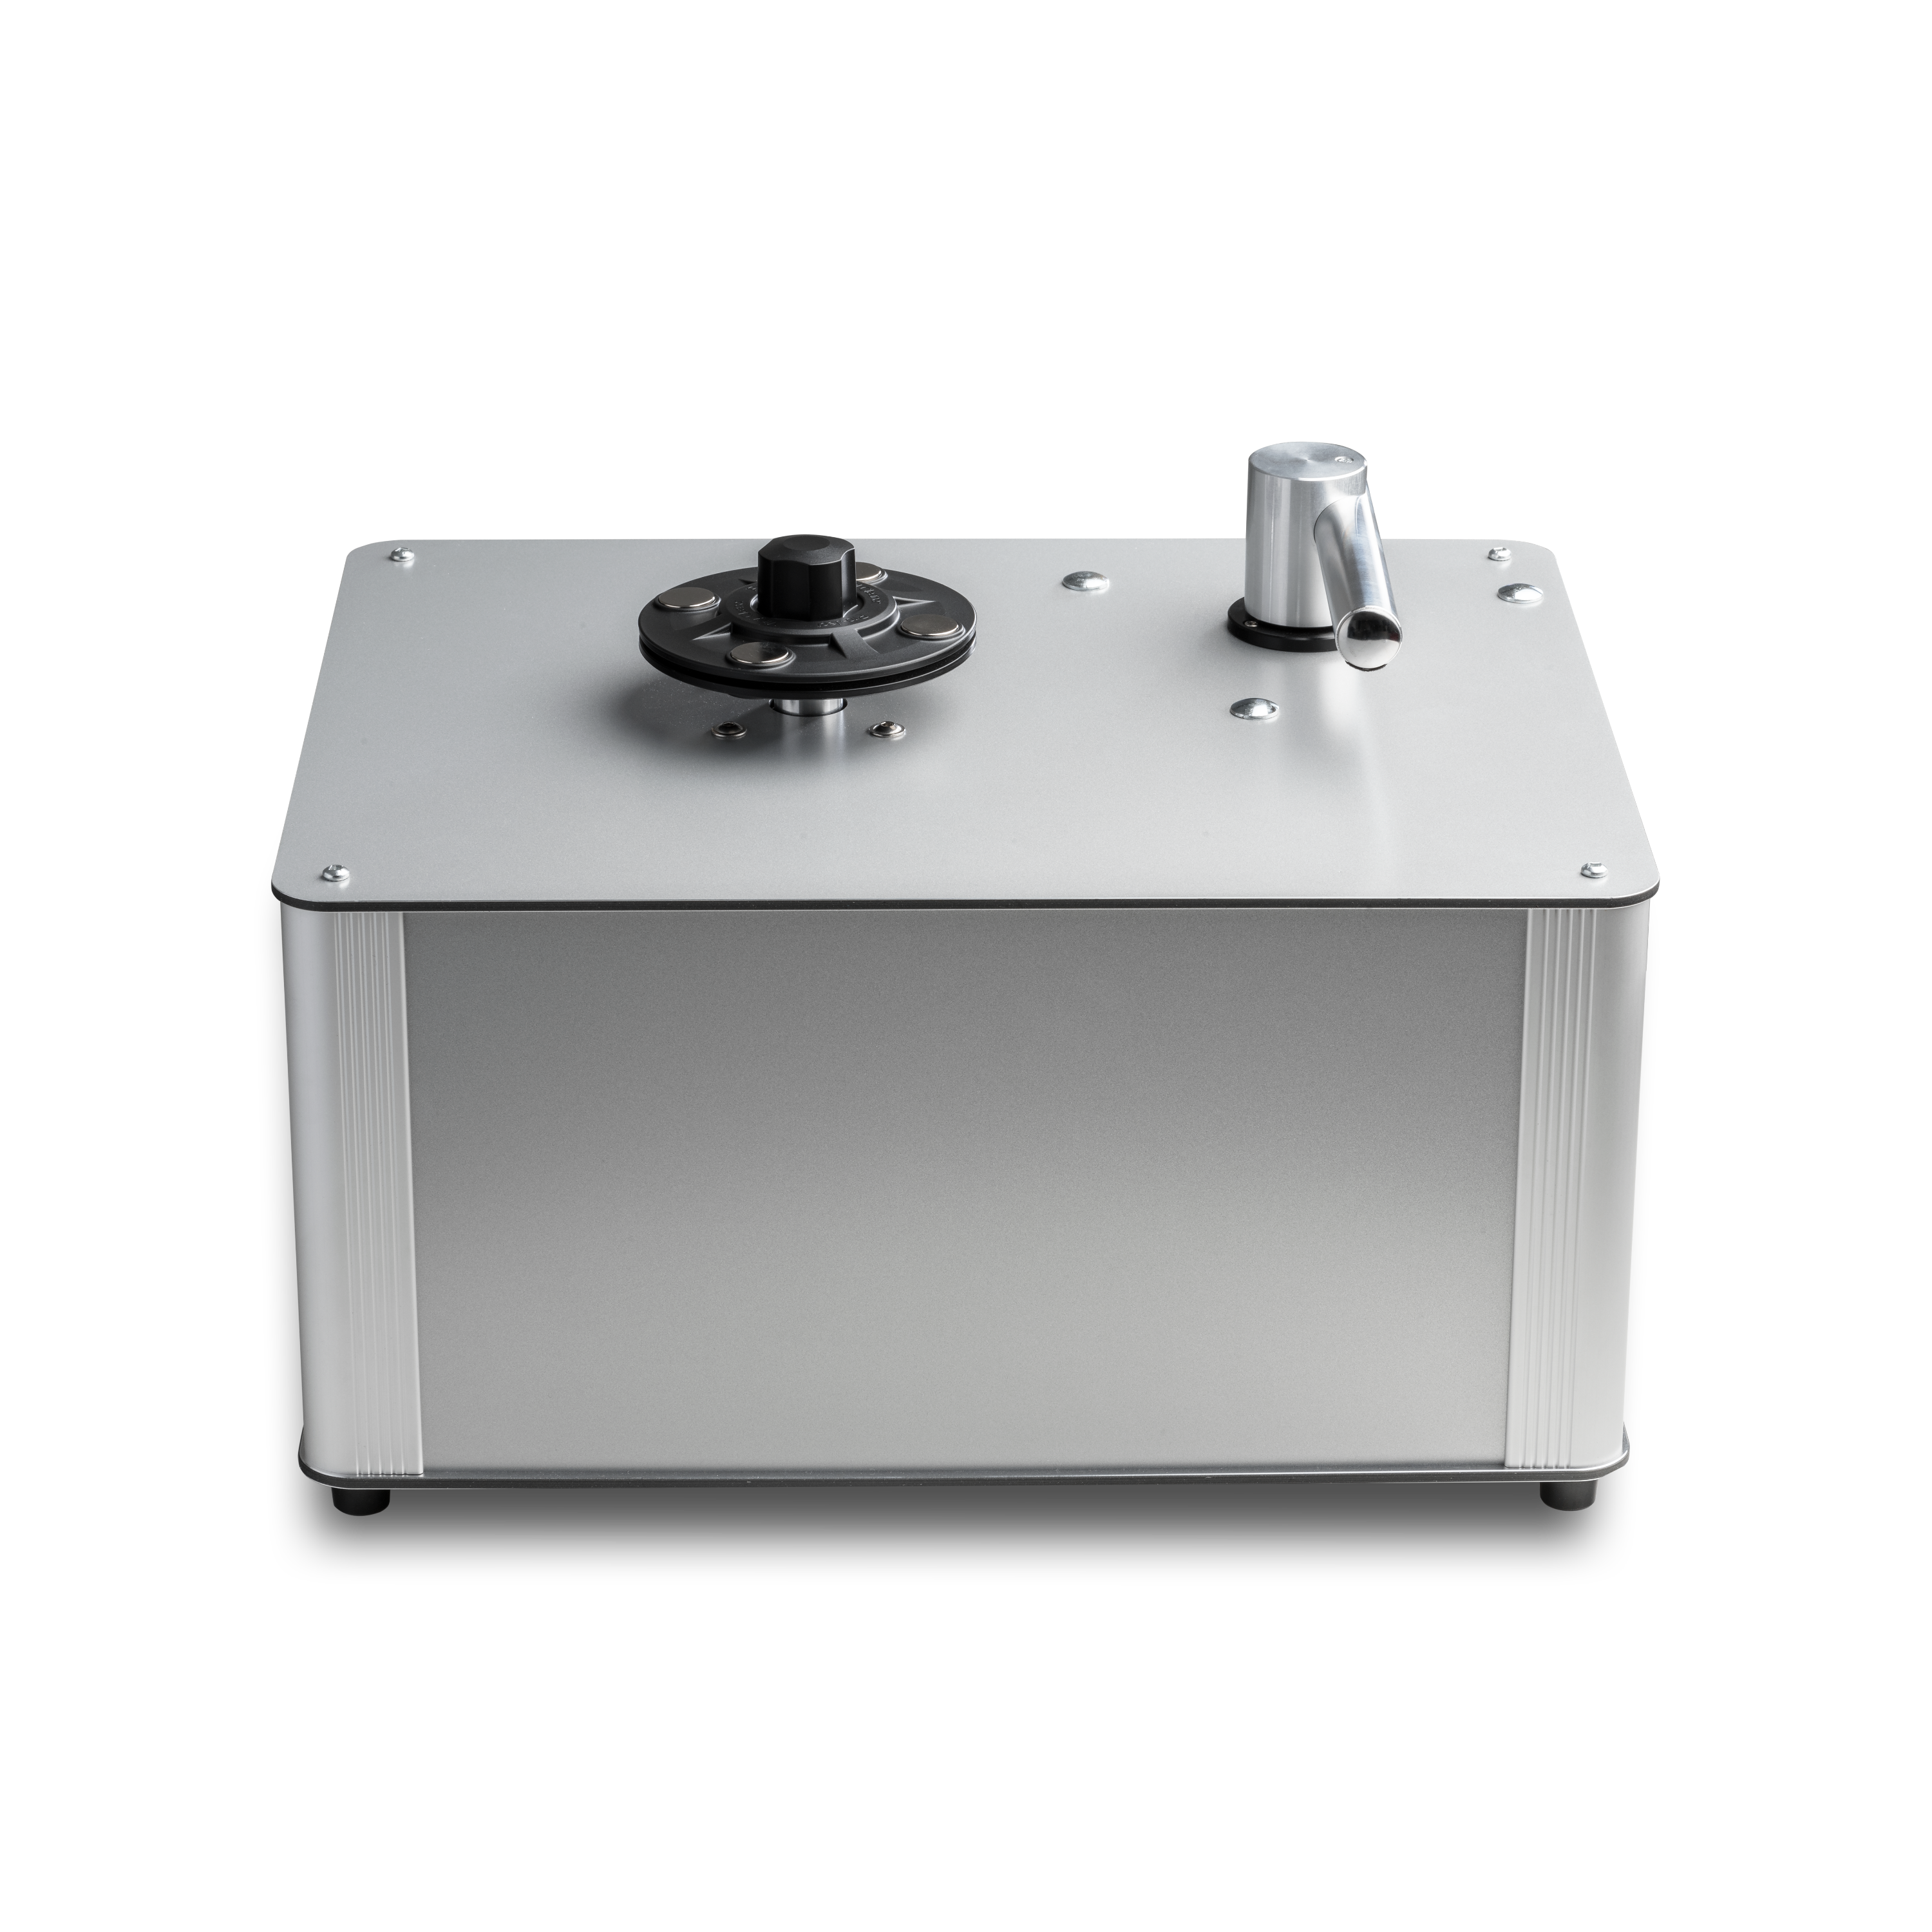 Pro-Ject - VC-S3 - Record Cleaning Machine Australia